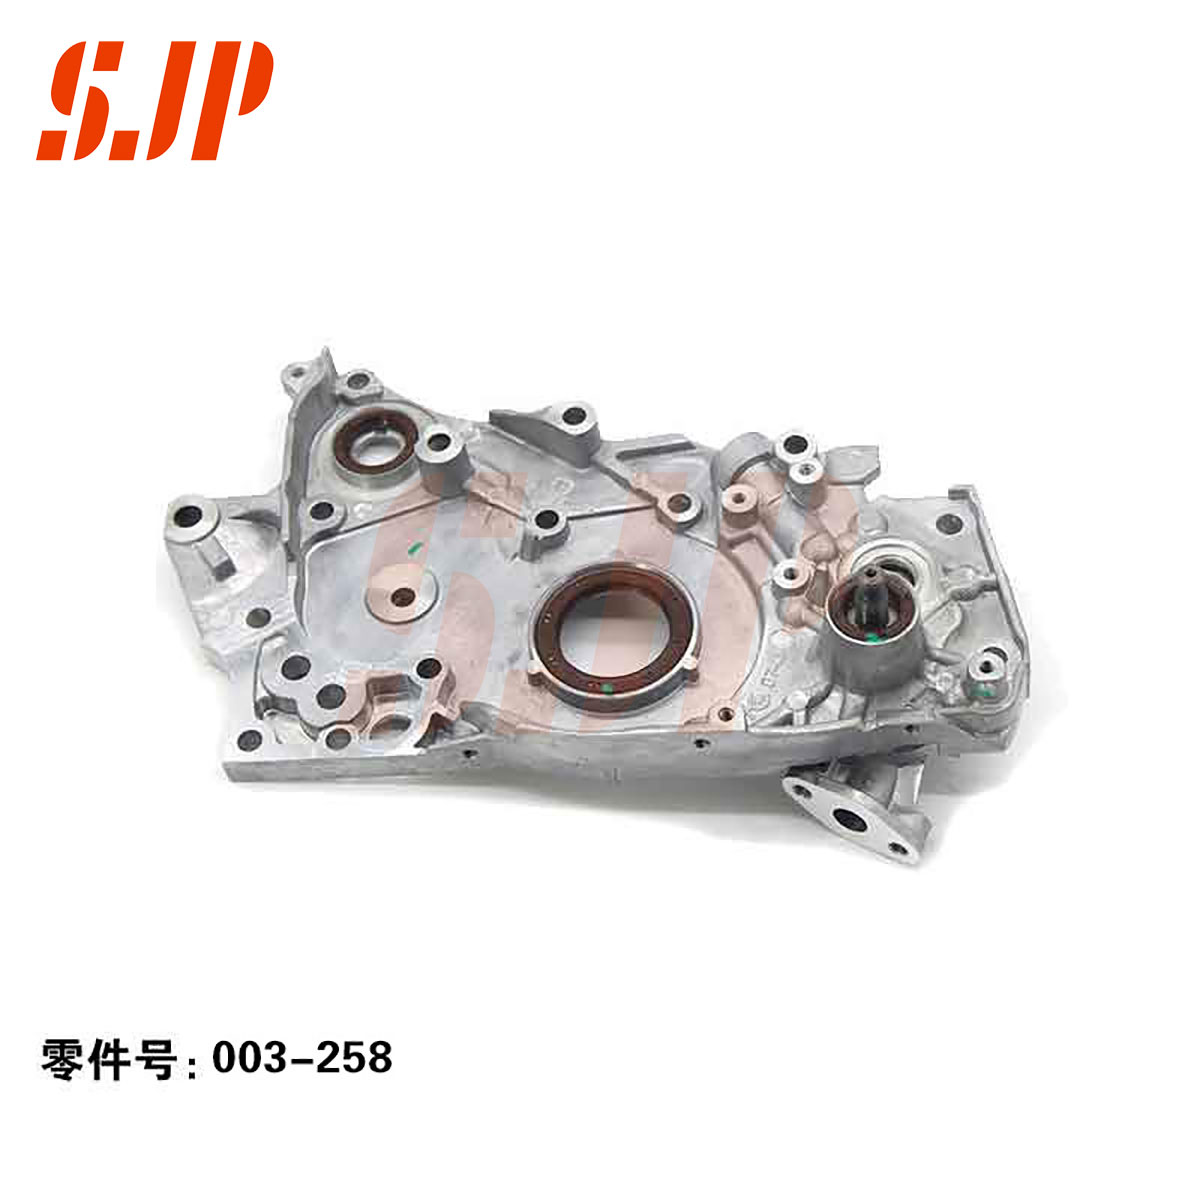 SJ-003-258 Oil Pump For 4G63T Front wheel drive